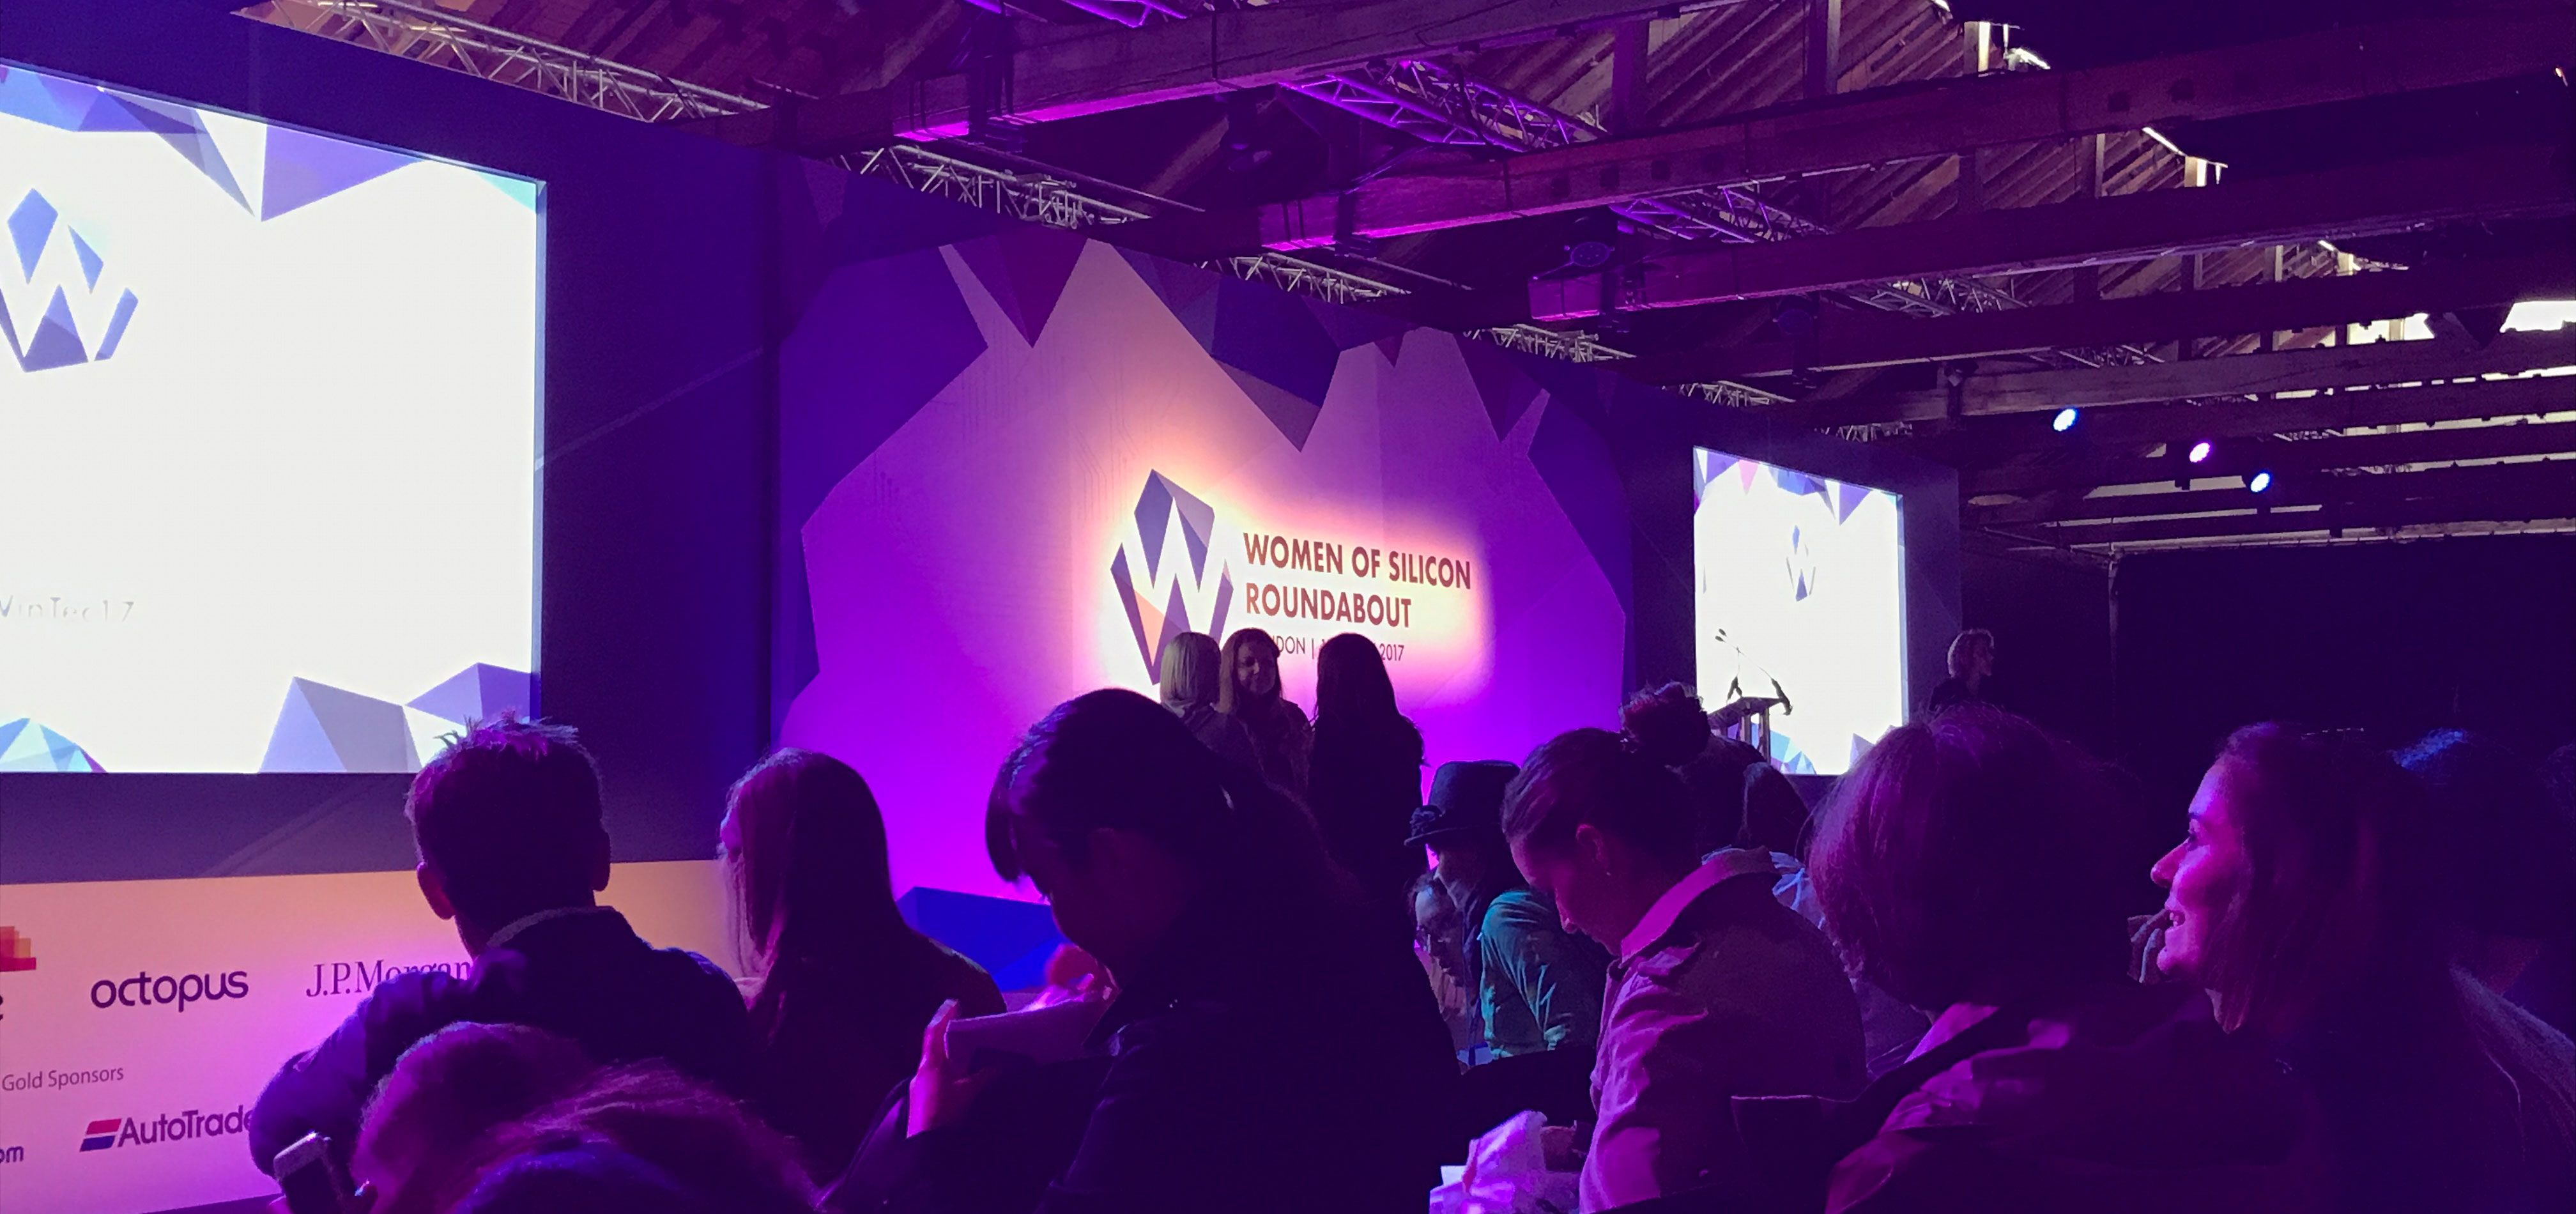 Women of Silicon Roundabout 2017: Refreshing, empowering and inclusive.